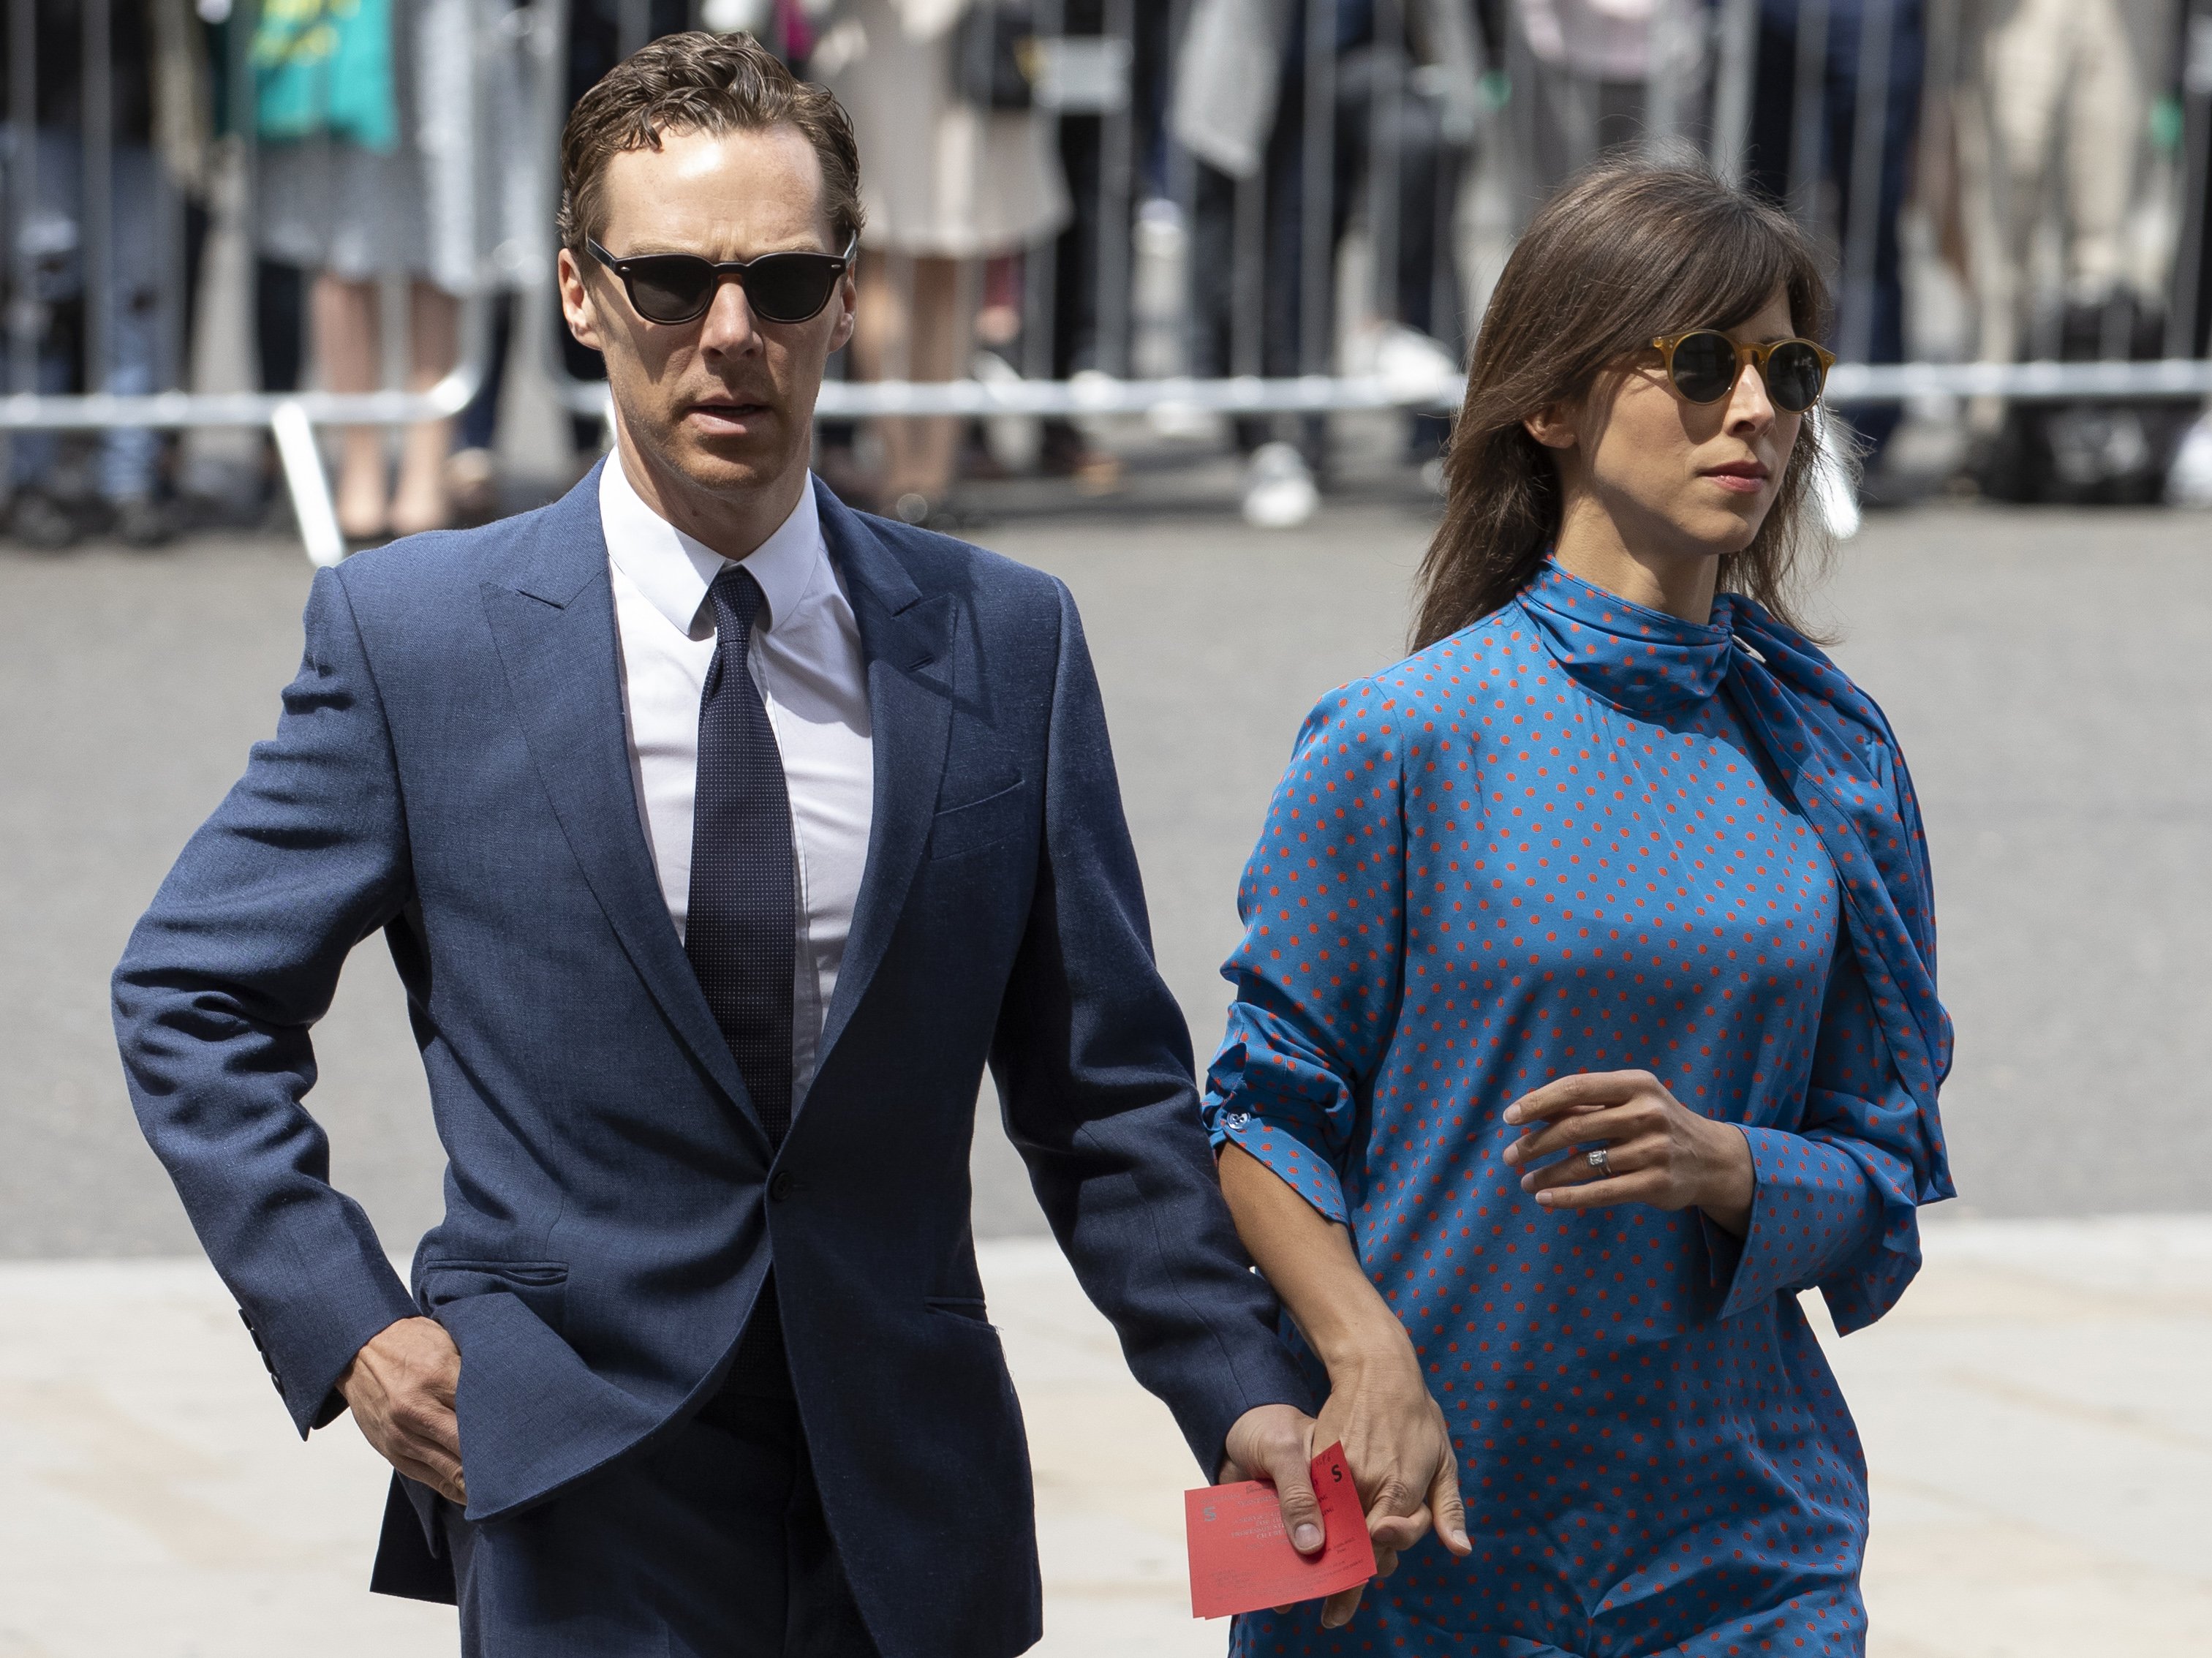 Benedict Cumberbatch and his wife Sophie Hunter arrive at Westminster Abbey ahead of Professor Stephen Hawking's memorial service on June 15, 2018, in London, England. | Source: Getty Images